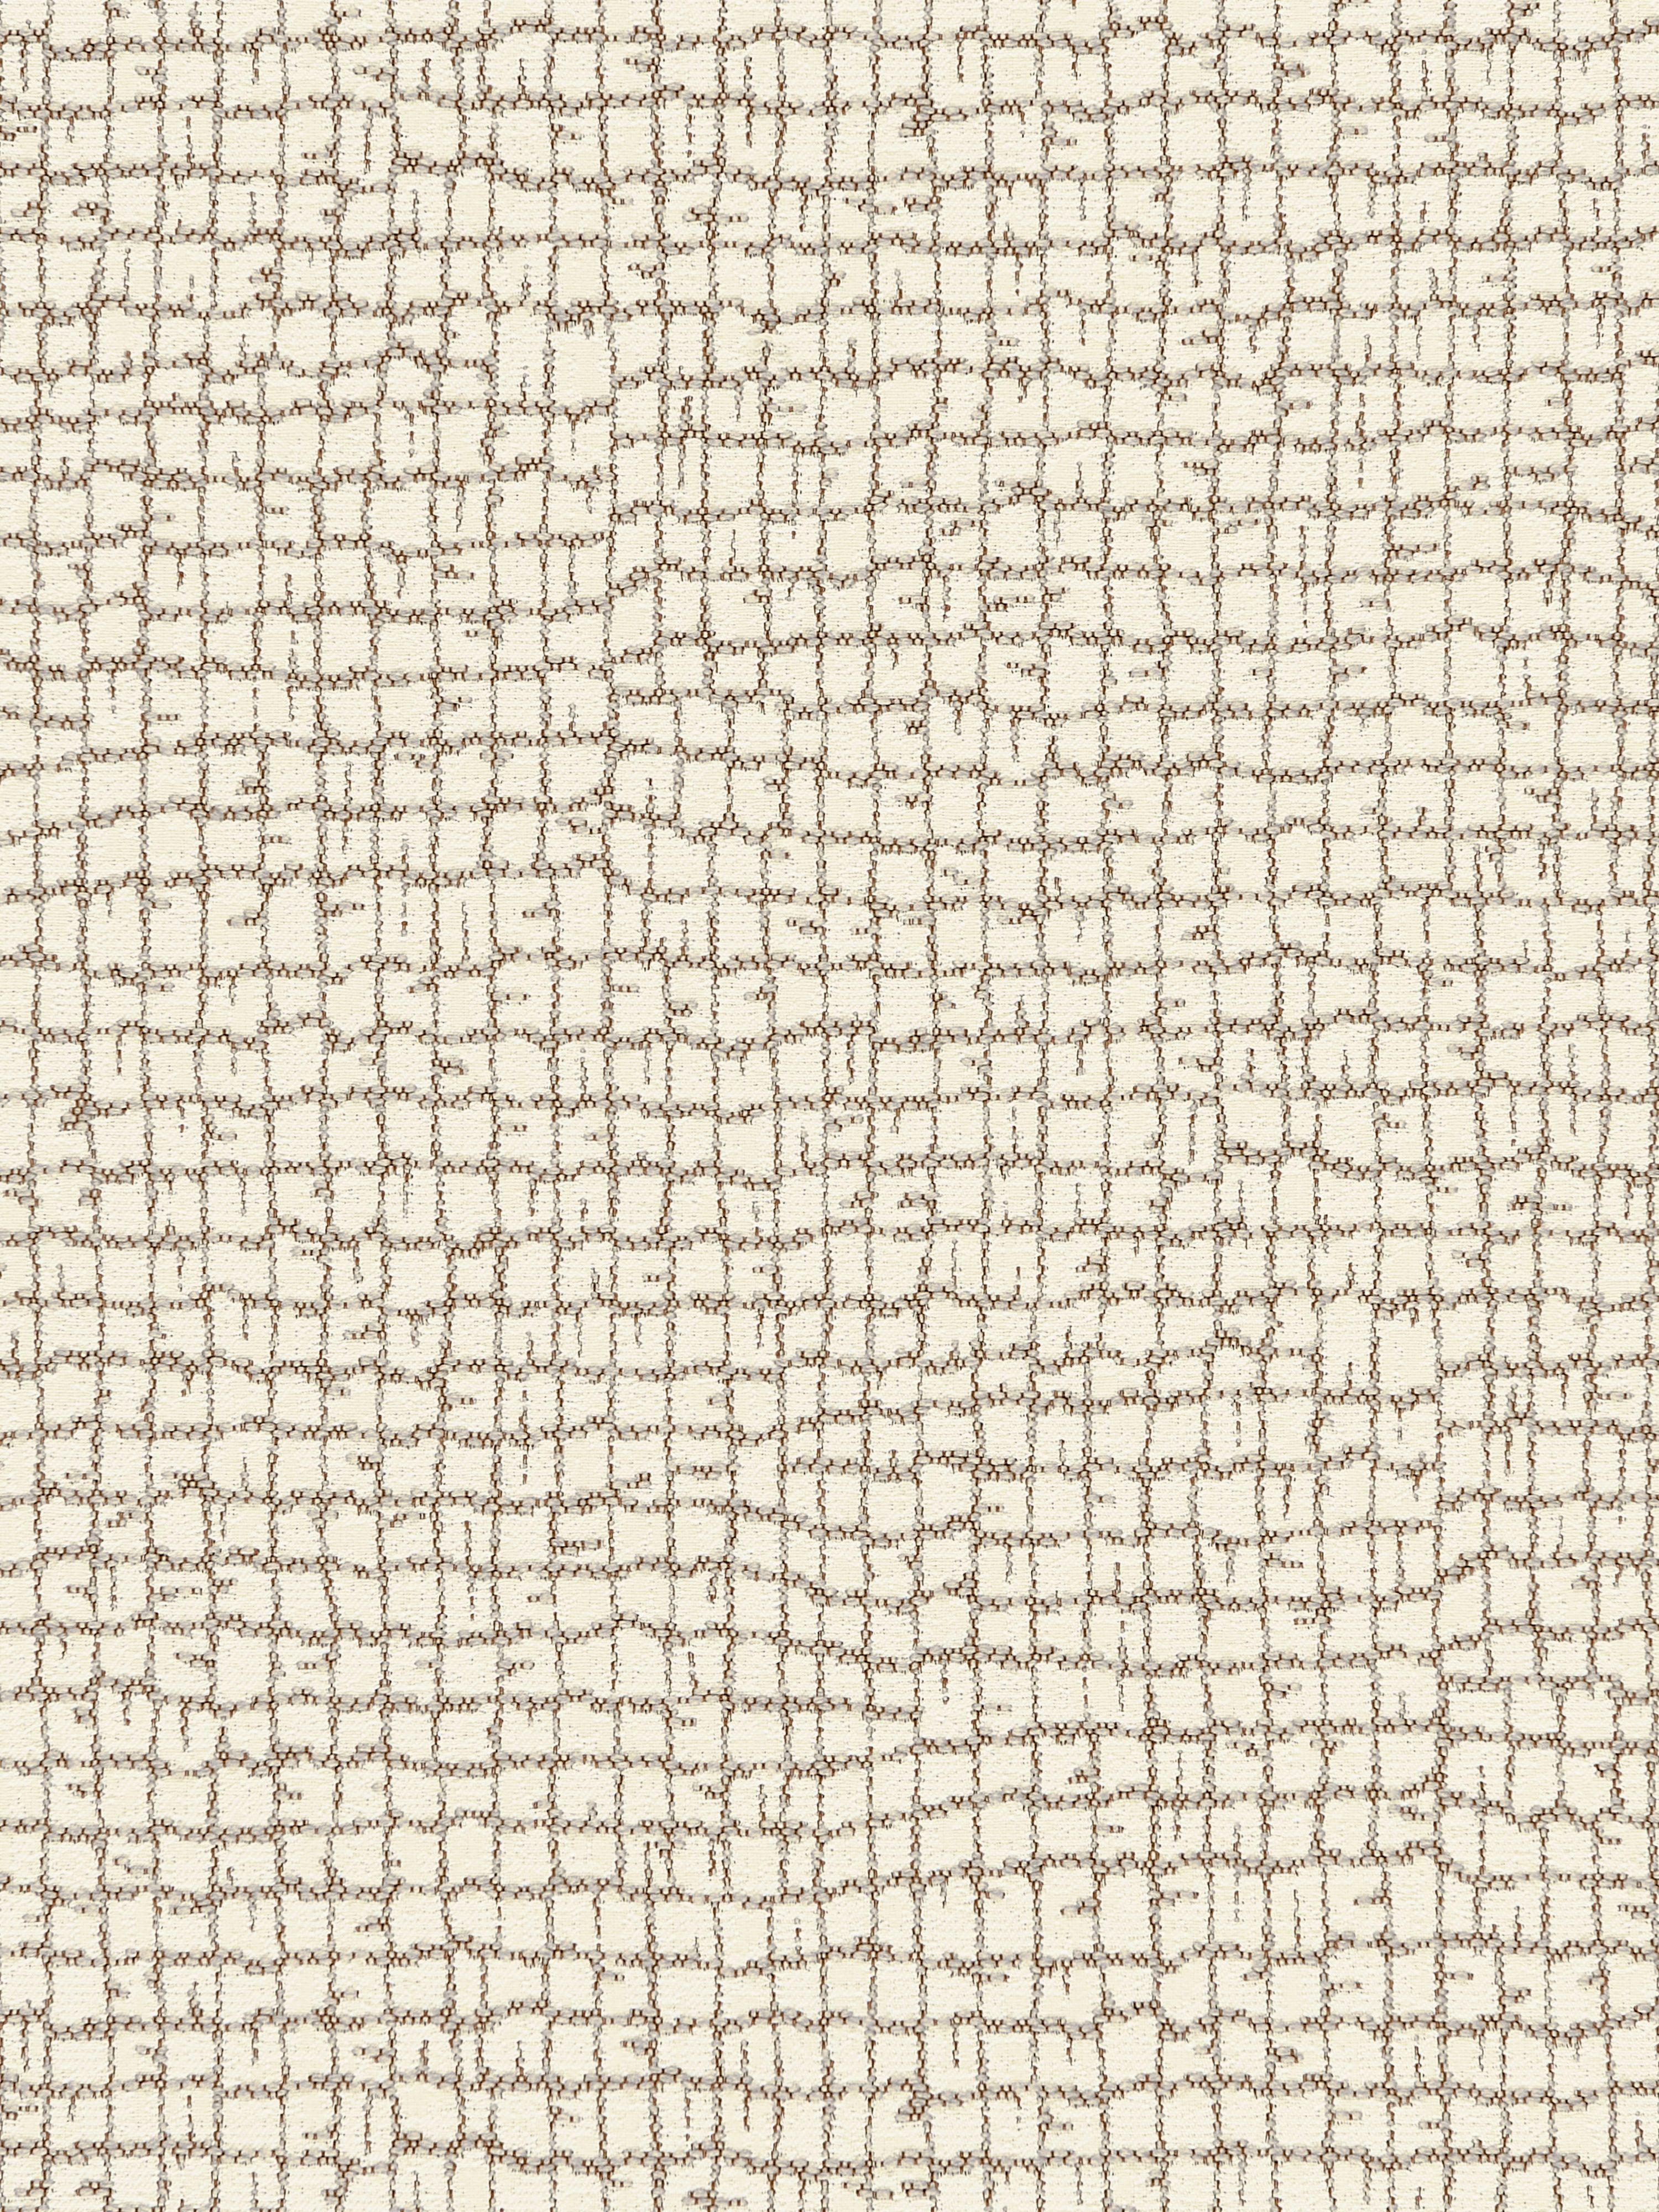 Troya Beach fabric in greige color - pattern number PO 0002TROY - by Scalamandre in the Old World Weavers collection